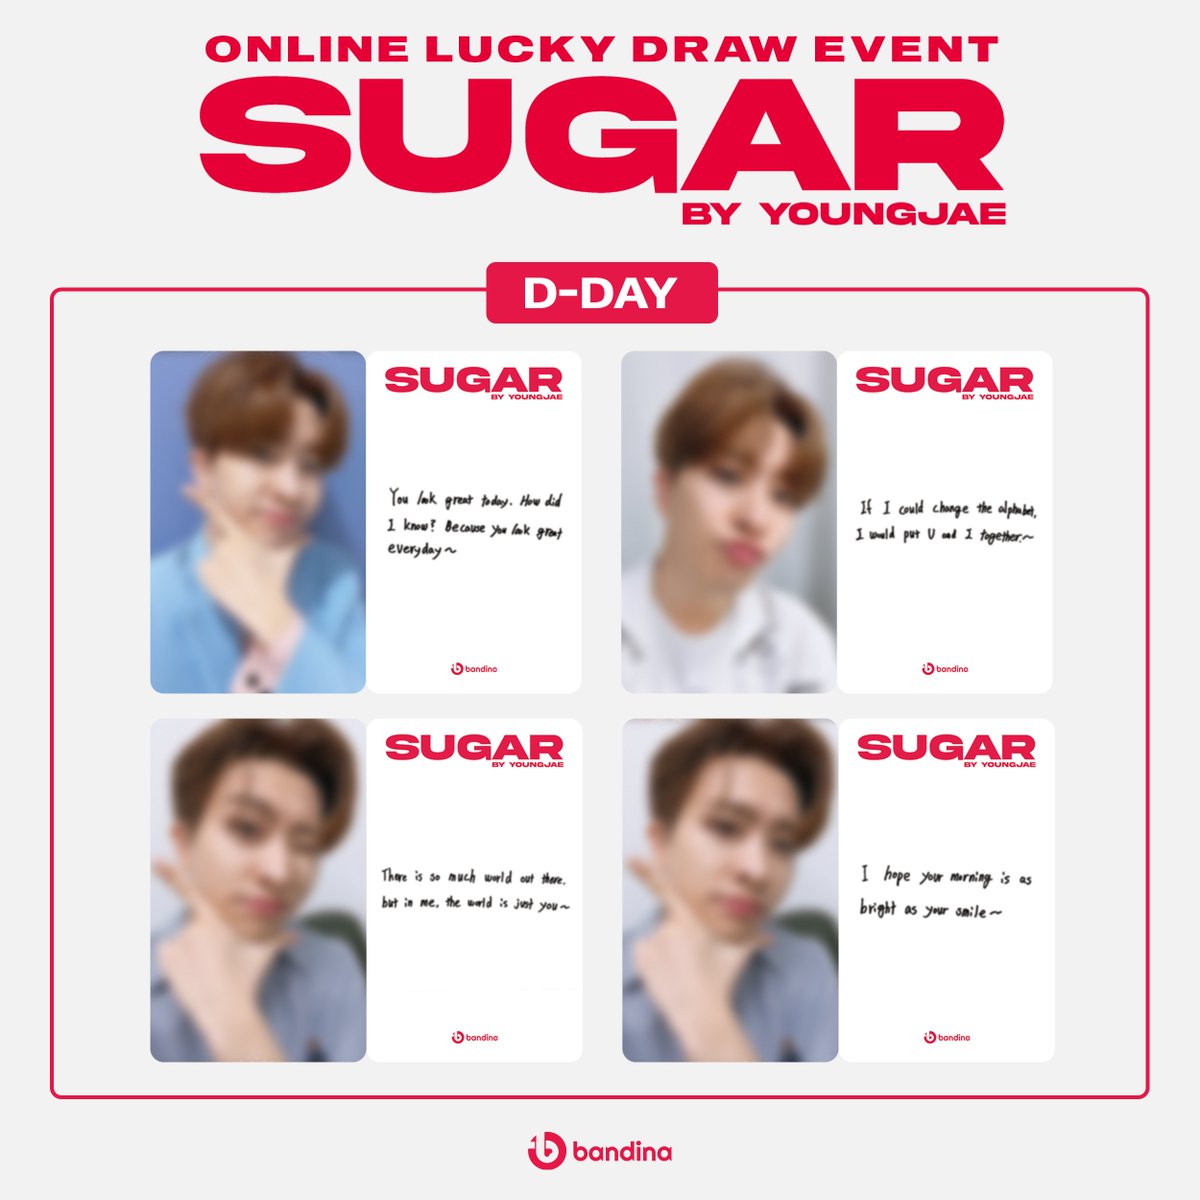 [D-DAY] BANDINA X YOUNGJAE 2nd Mini Album 'SUGAR' ONLINE LUCKY DRAW EVENT ⏰Only 12 hours left! 👀Check our special price😍 ➠ 43% OFF (ลด43%) FC LINK👉bit.ly/3Jggrne